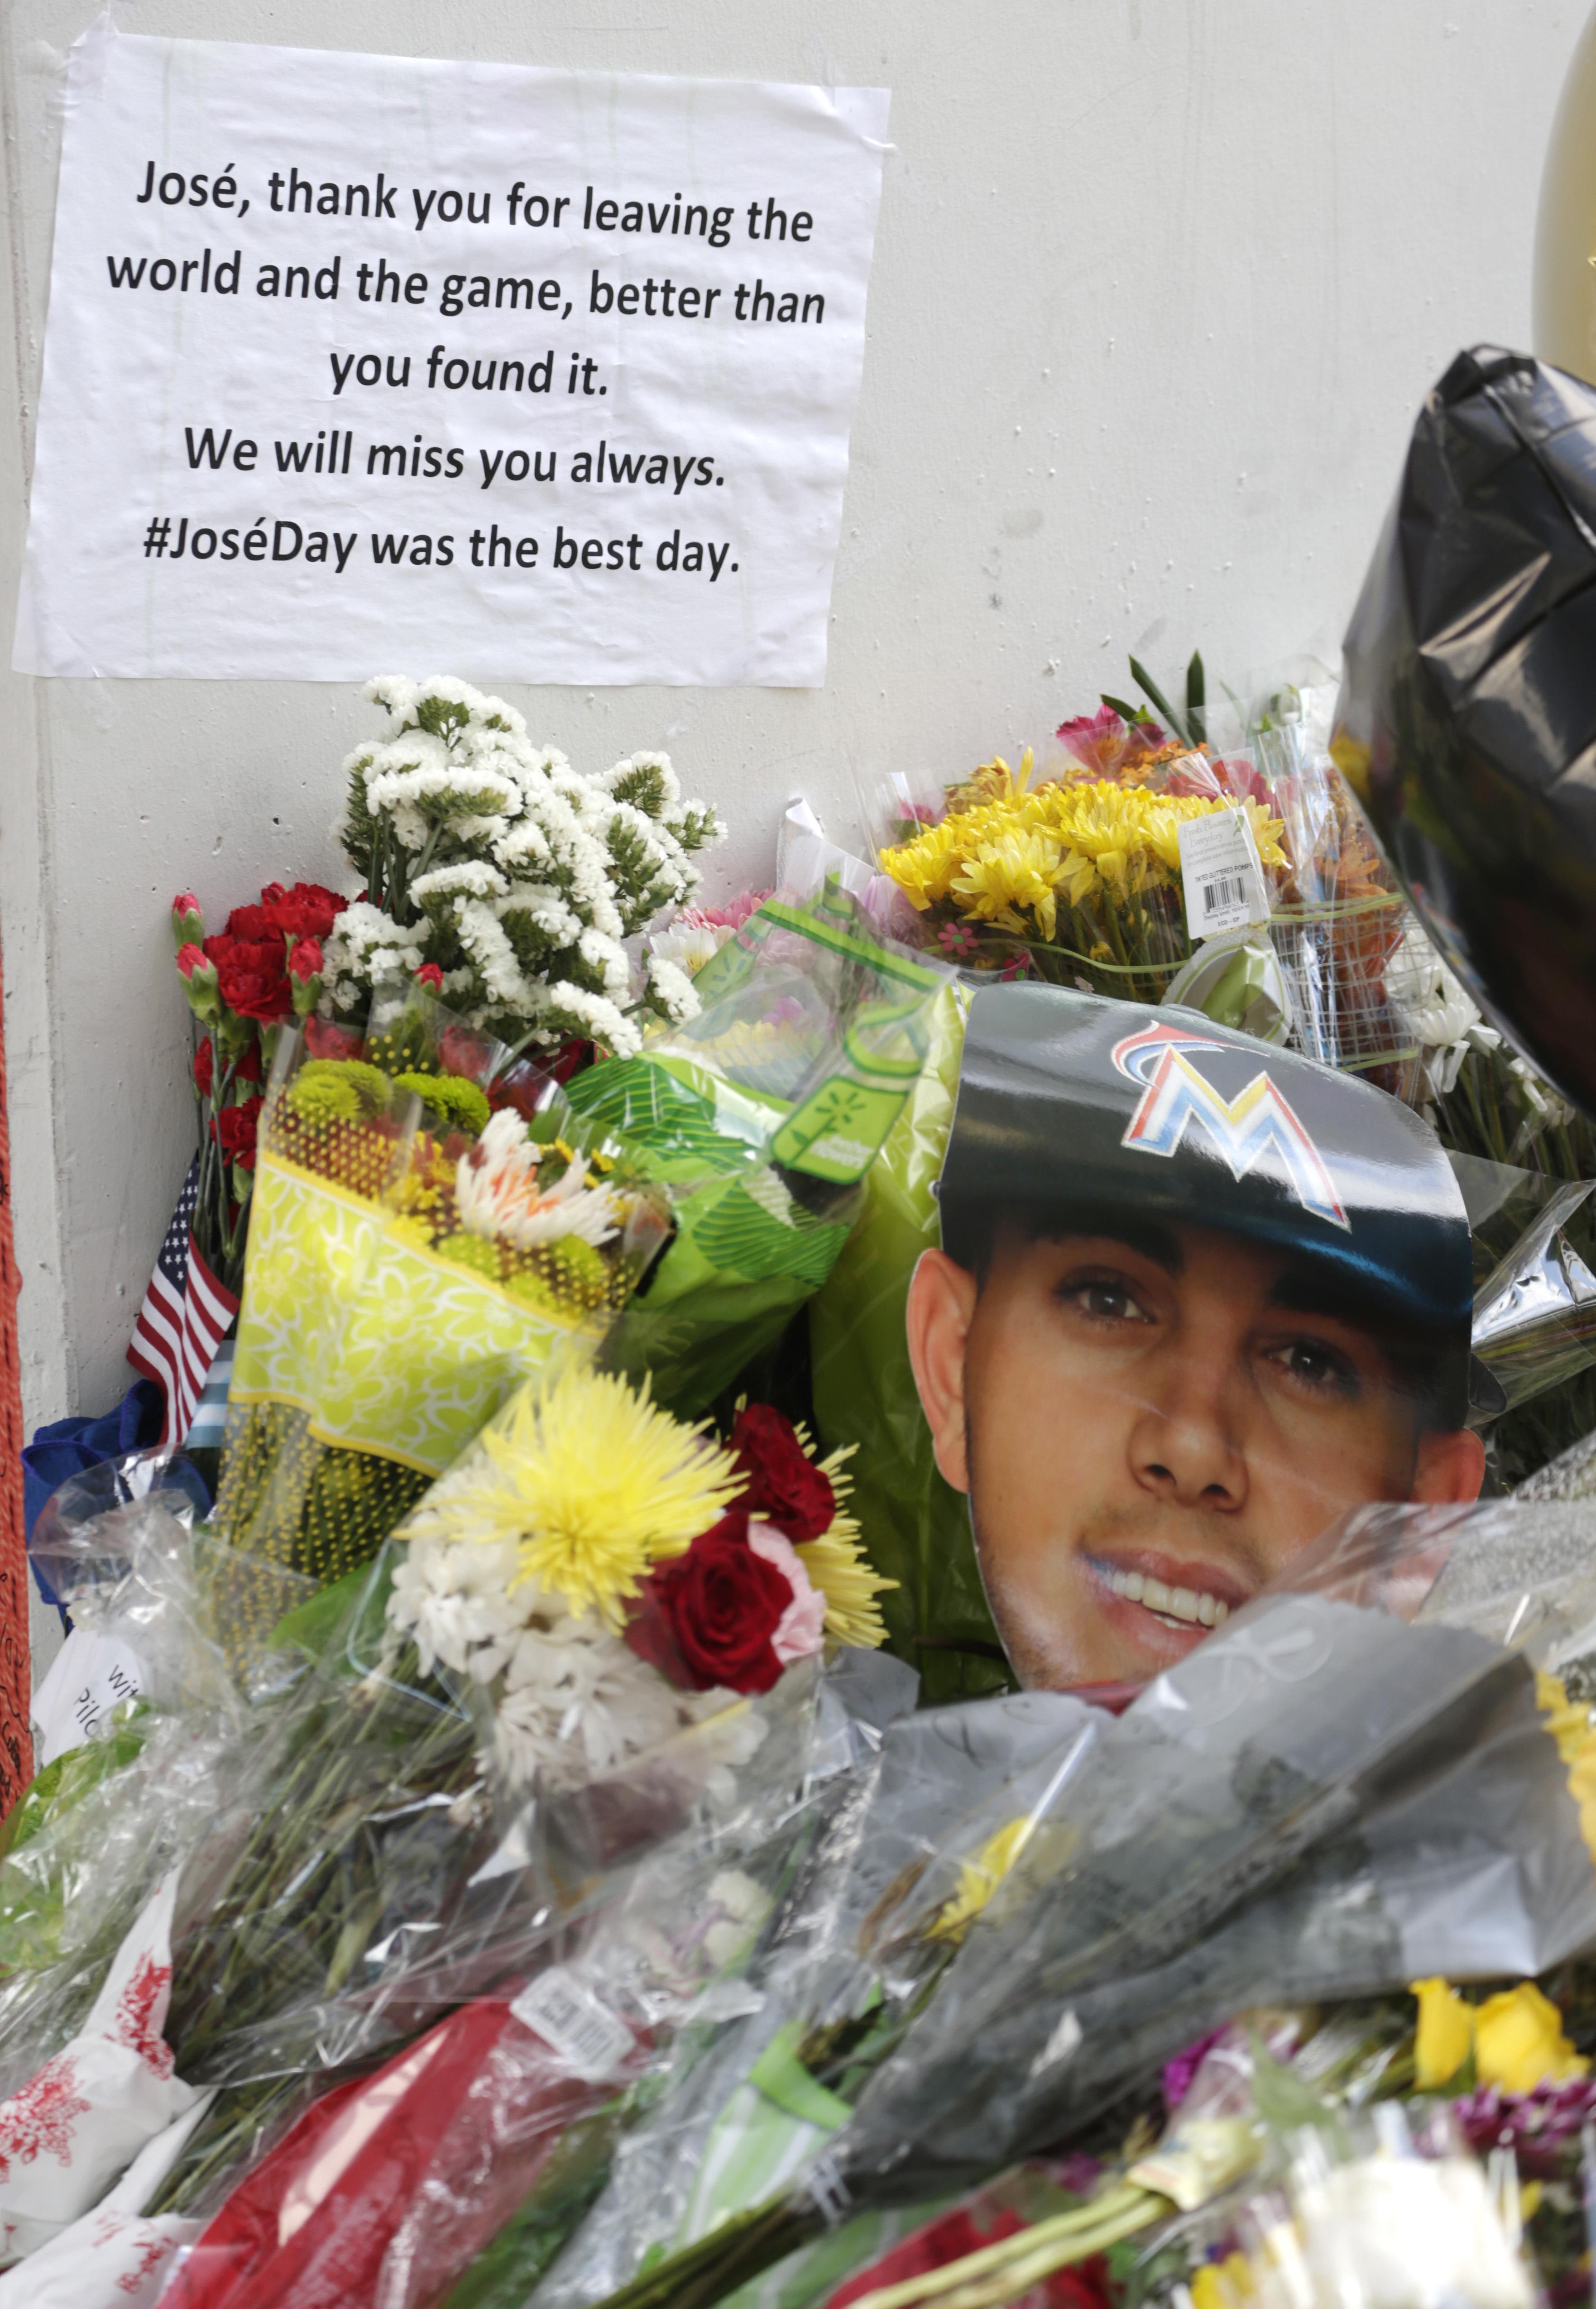 Jose Fernandez Funeral: Family and Friends Gather for Funeral